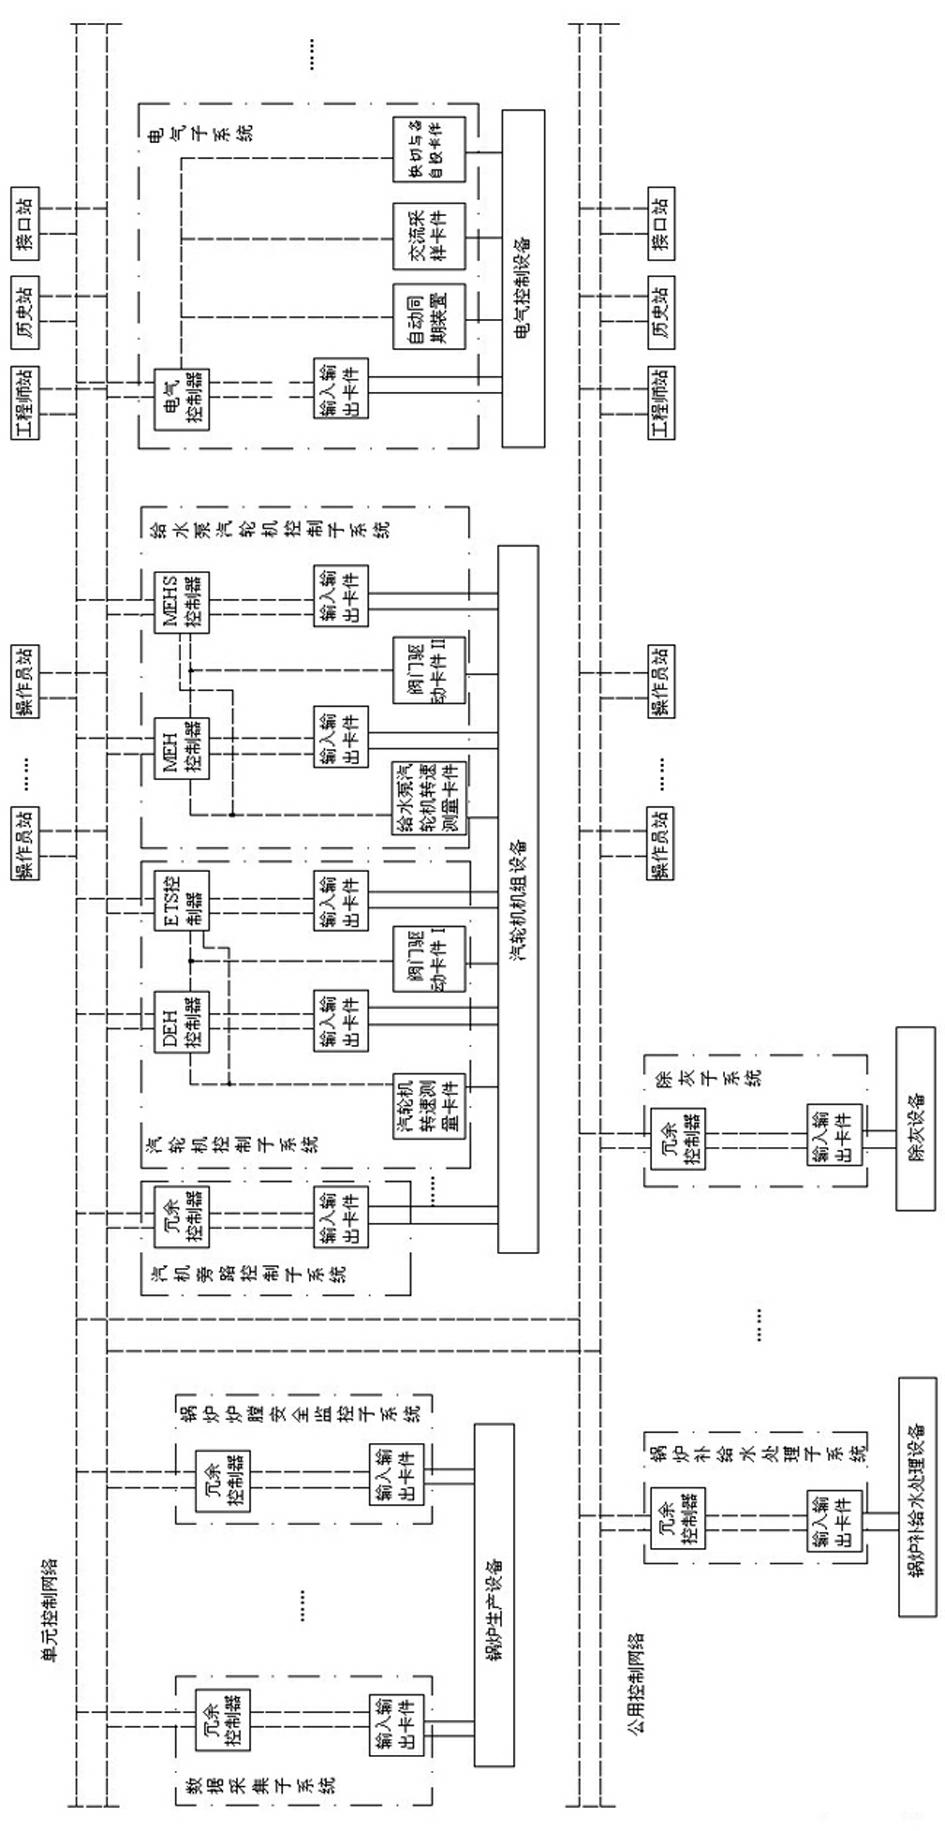 DCS (Distributed Control System) based integrated-control system of coal-fired power plant